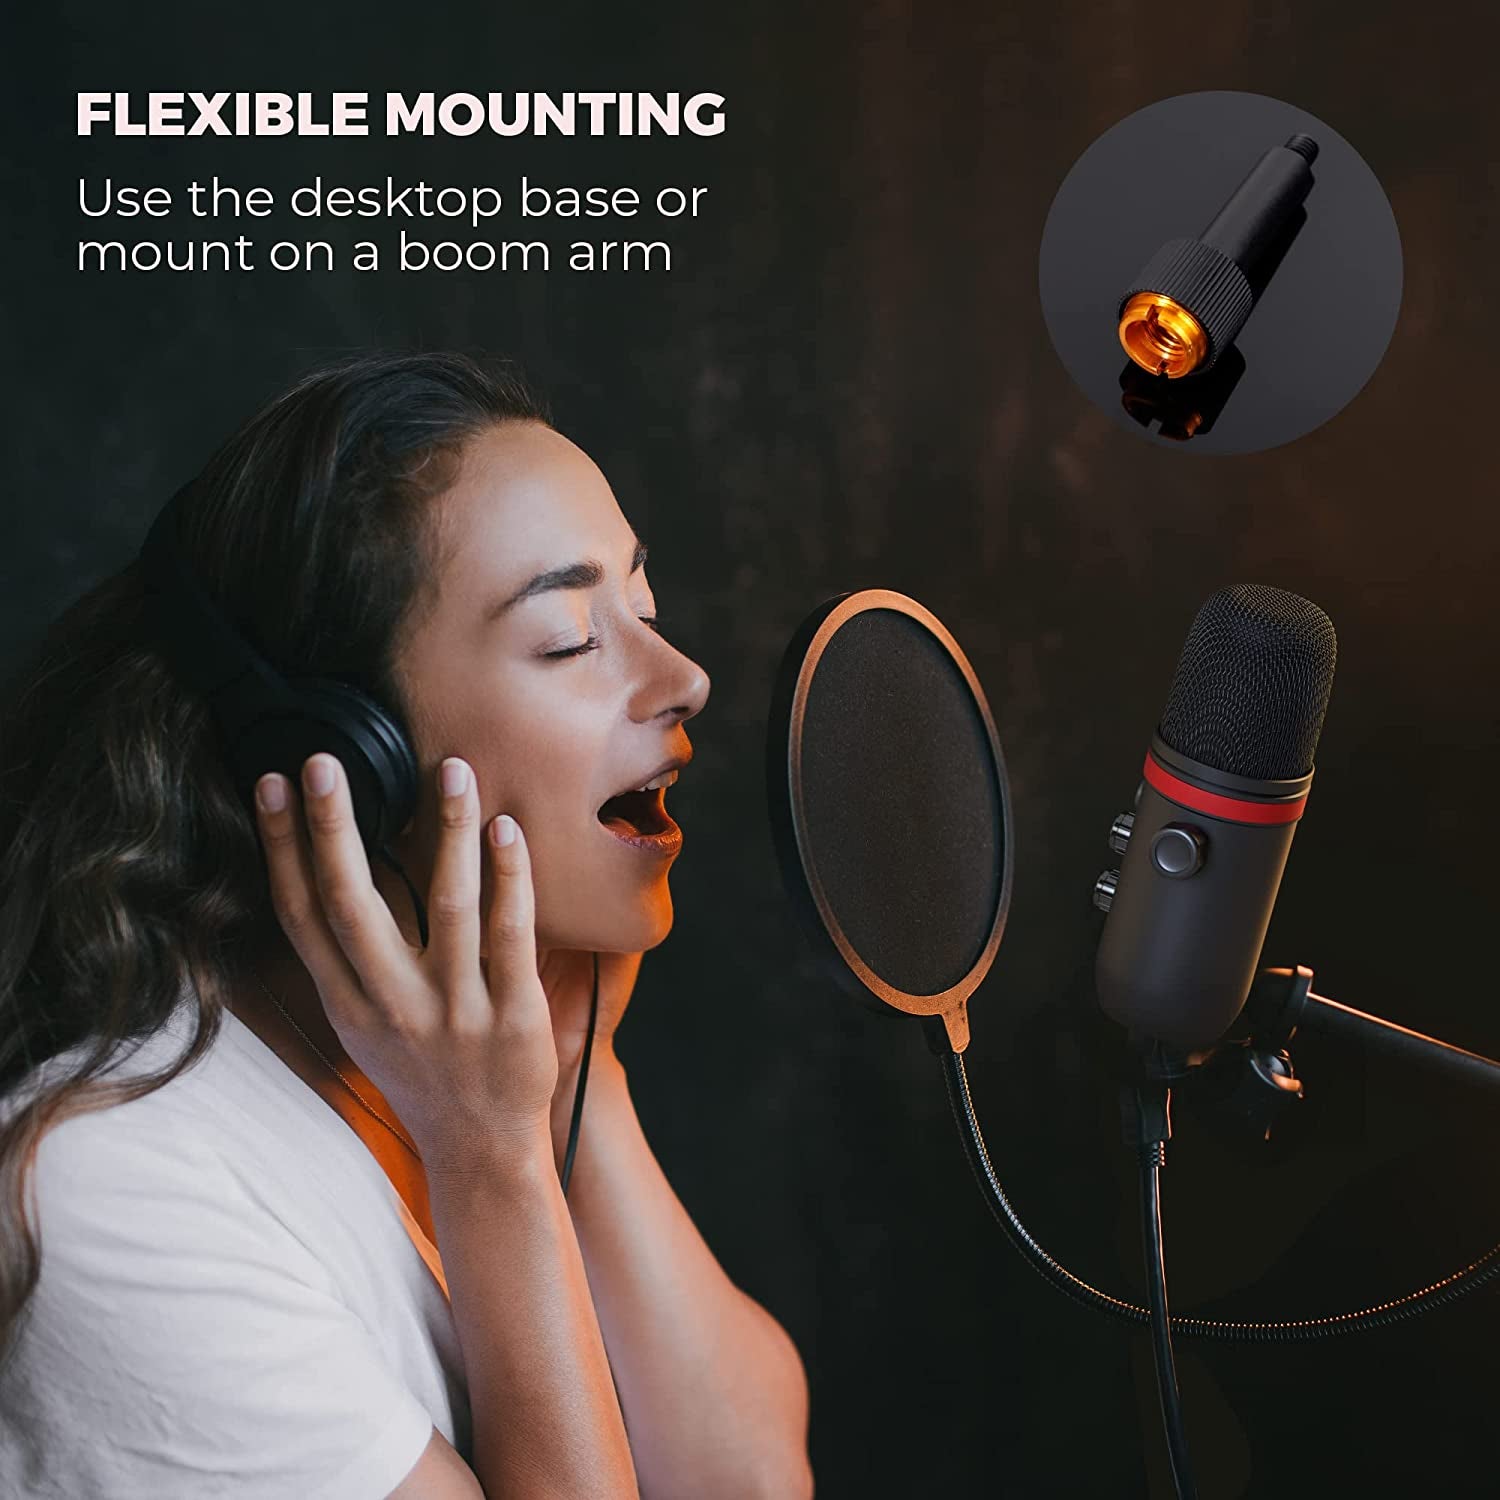 Professional USB Condenser Microphone for Gaming, Streaming, and Studio Recording - Compatible with Pc, Laptop, Phone, Ps4/5 - USB Type C Plug and Play – Headphone Output, Volume Control, LED Mute Button